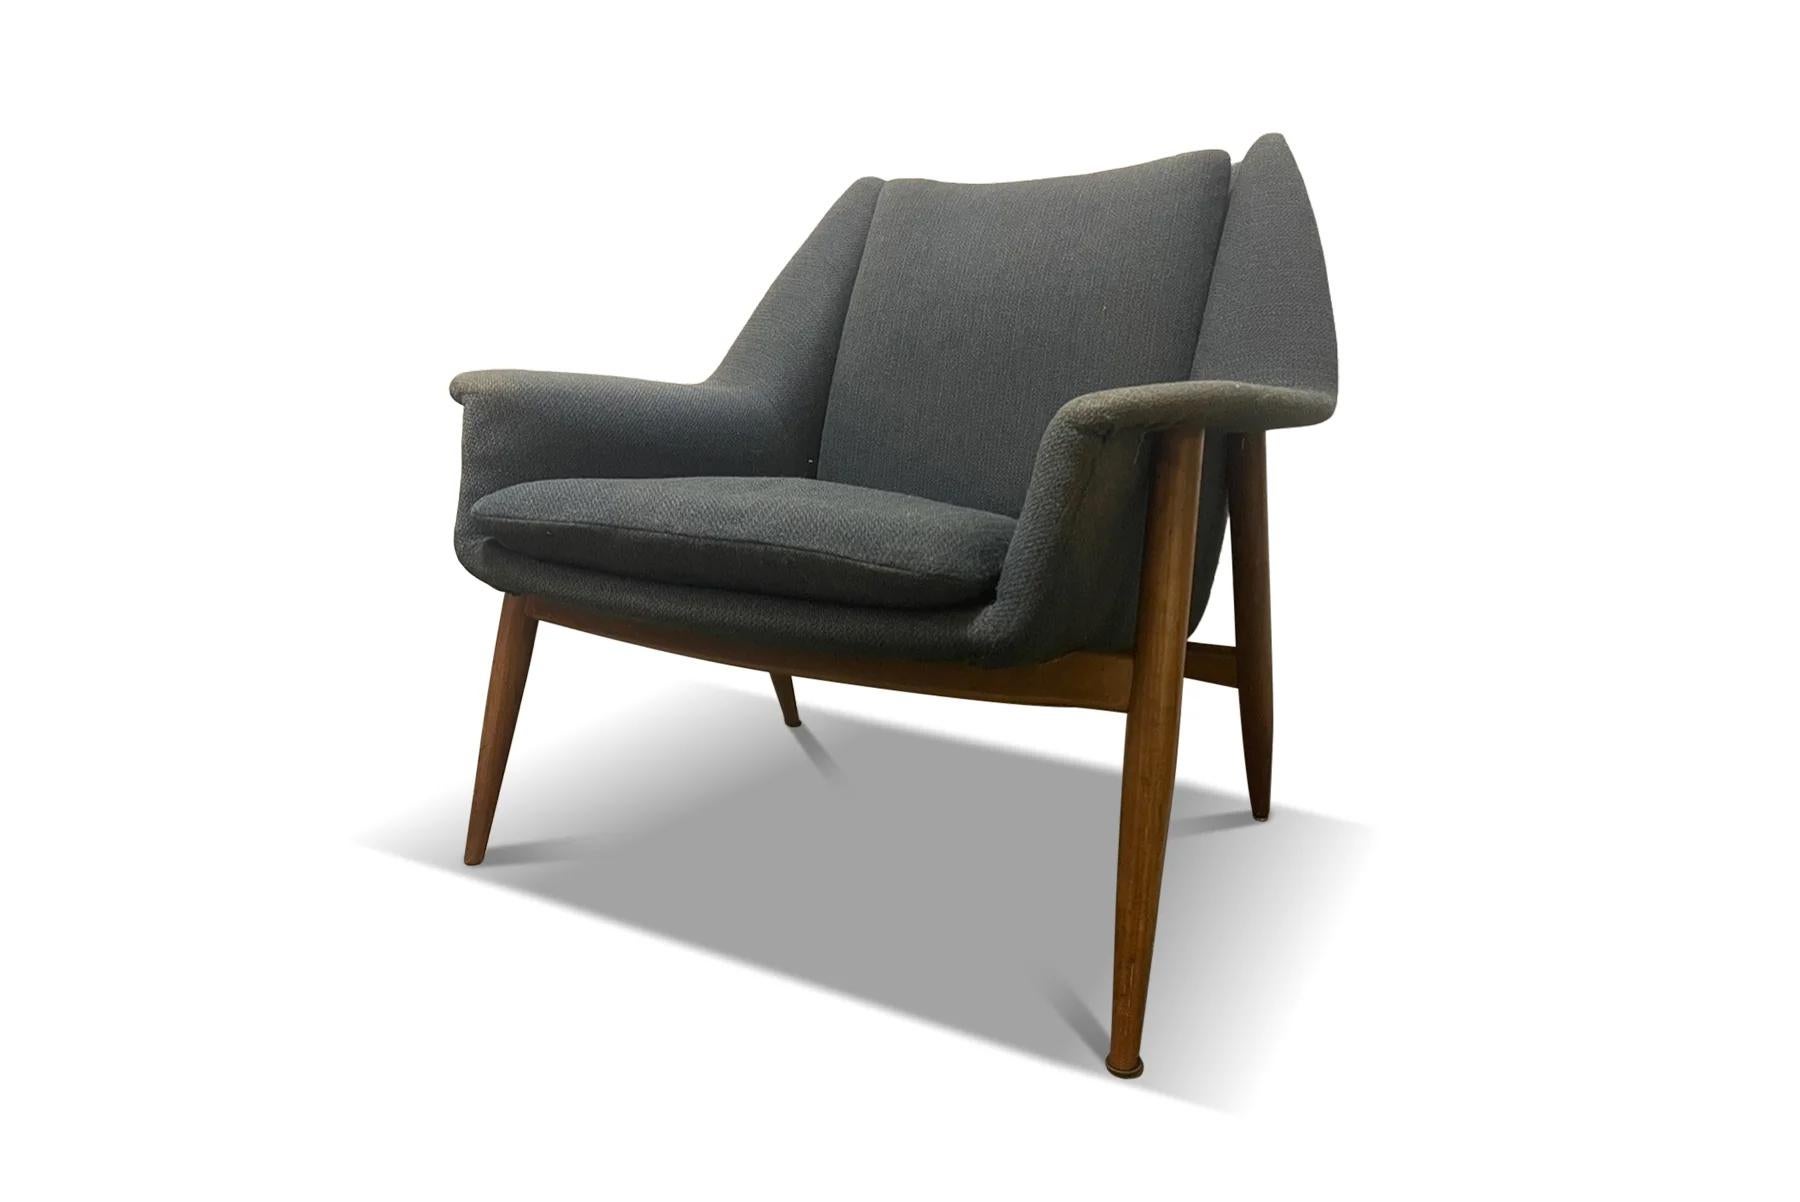 Pair of 1950s atomic lounge chairs + sofa in the manner of folke ohlsson For Sale 2